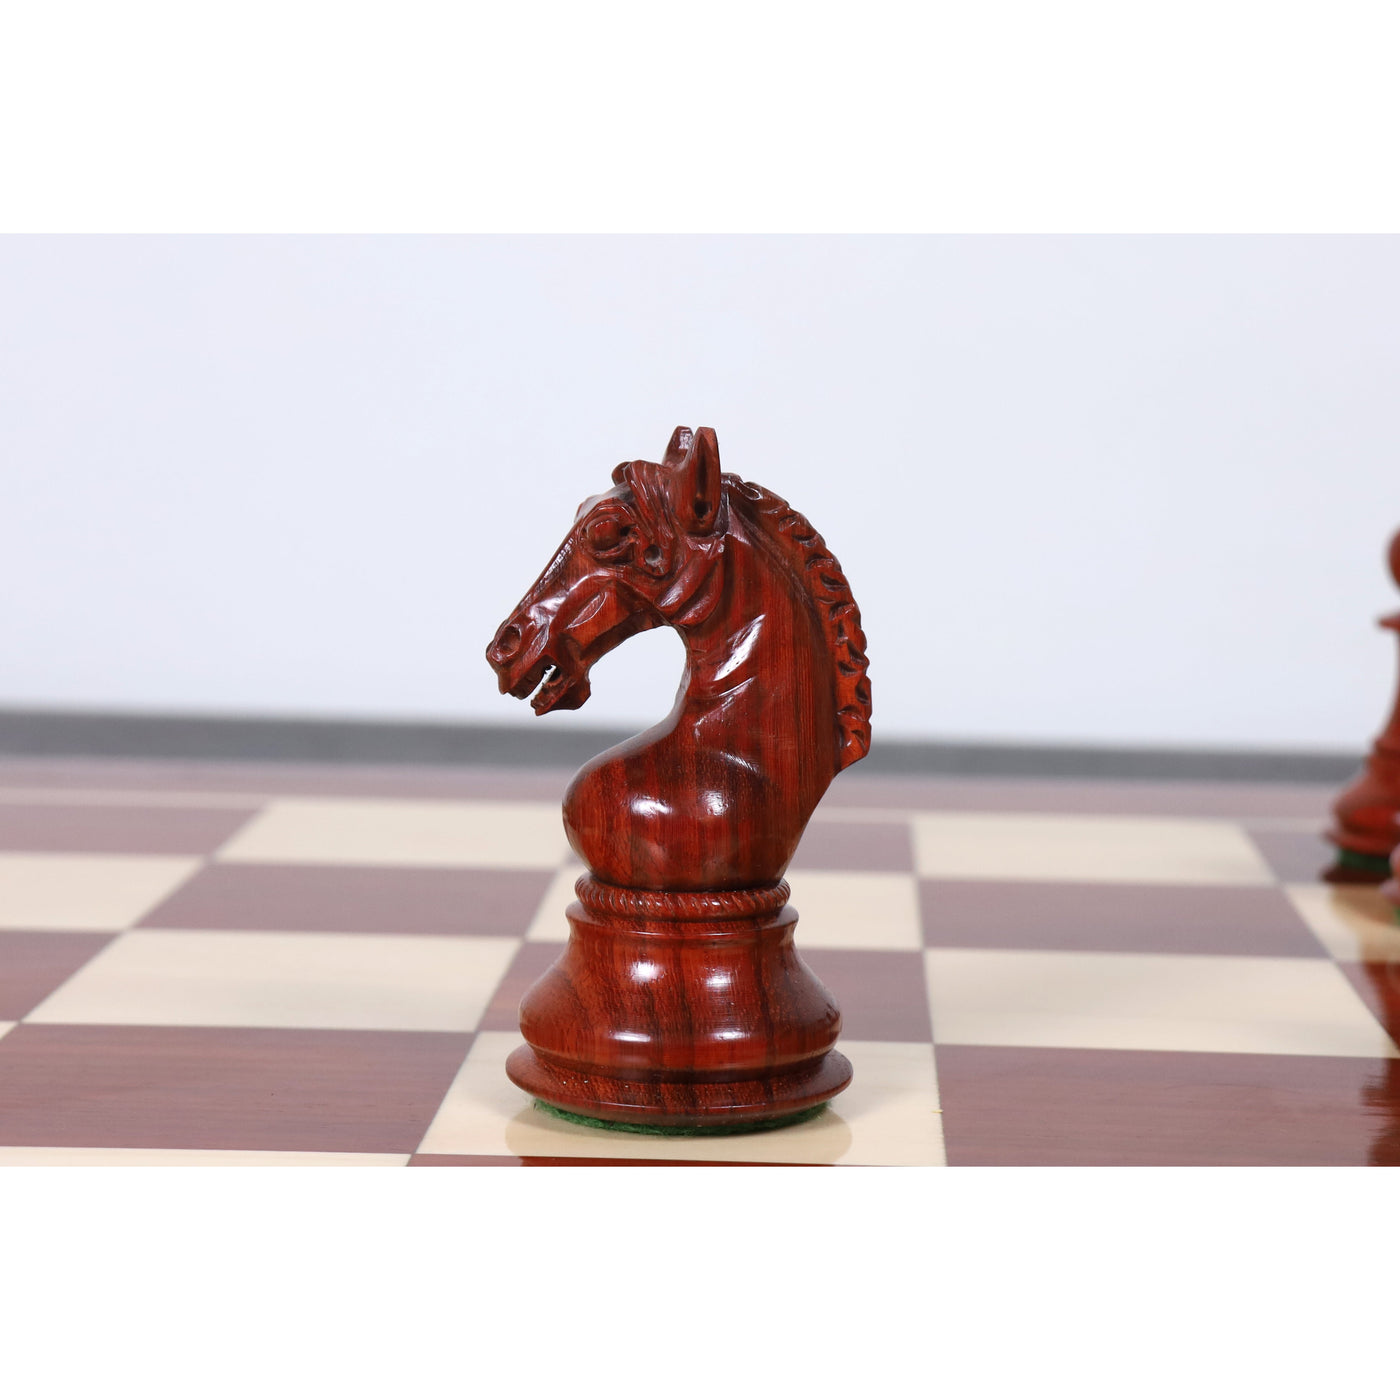 Combo of 4.5" Sheffield Staunton Luxury Chess Set - Pieces in Bud Rosewood with Board and Box